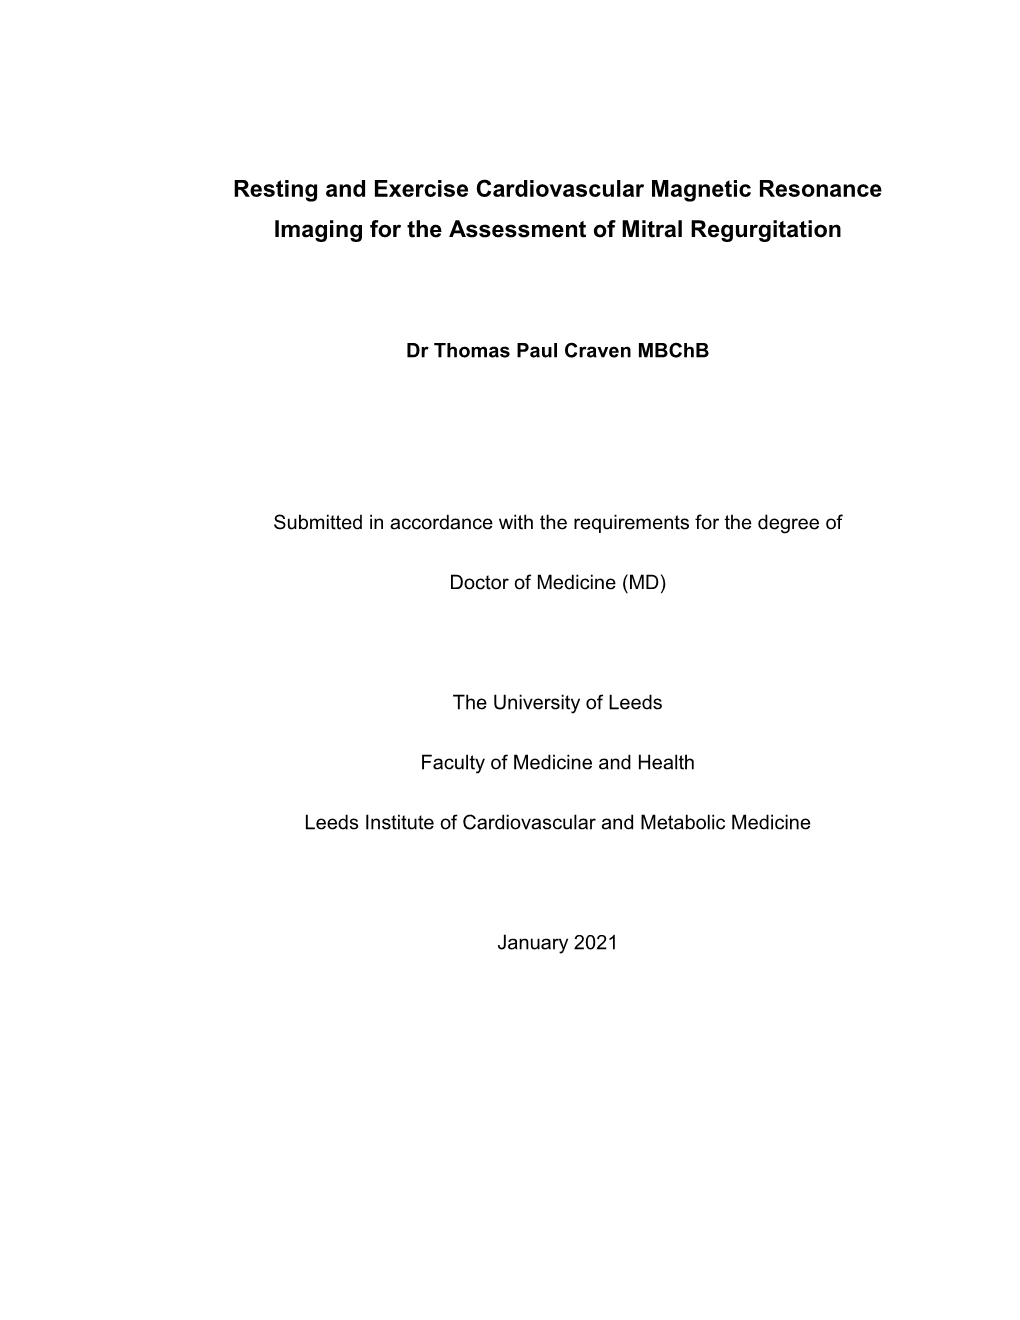 Resting and Exercise Cardiovascular Magnetic Resonance Imaging for the Assessment of Mitral Regurgitation